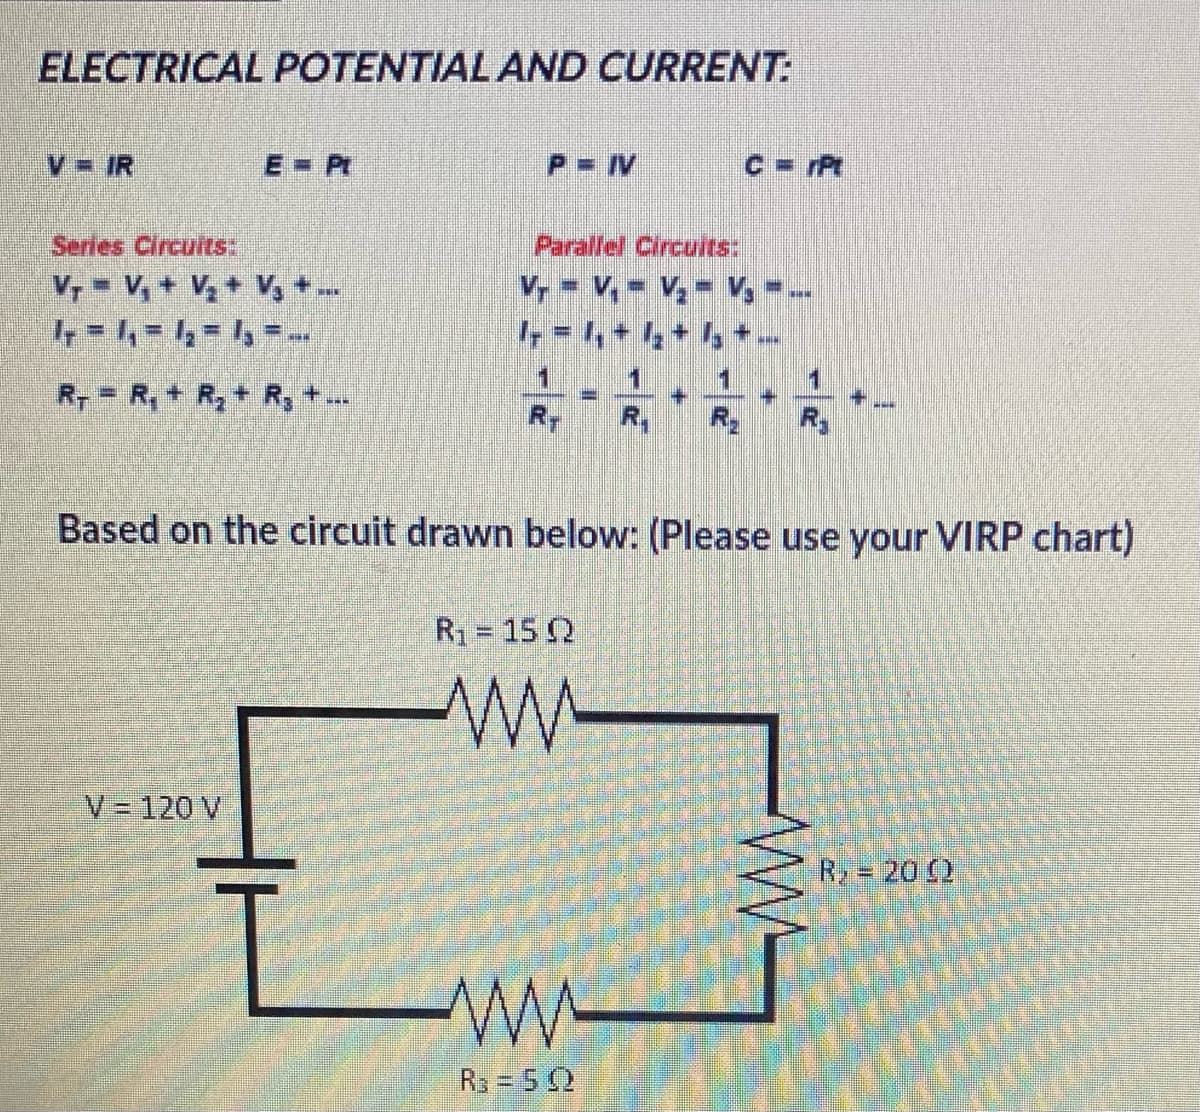 ELECTRICAL POTENTIAL AND CURRENT:
V = IR
E=Pt
Series Circuits:
Vr = V₁ + V₂ + V₂ + ...
4 = 4 = 4 = 4,--
R, = R₁ + R₂ + R₂ + ...
V = 120 V
P= IV
Parallel Circuits:
V₂ = V₁ V₂ V₂ -
11
R₁ = 15 02
1
R₂ = 502
+
INNEN
4
Based on the circuit drawn below: (Please use your VIRP chart)
NEW
R₁
www
R, = 2002